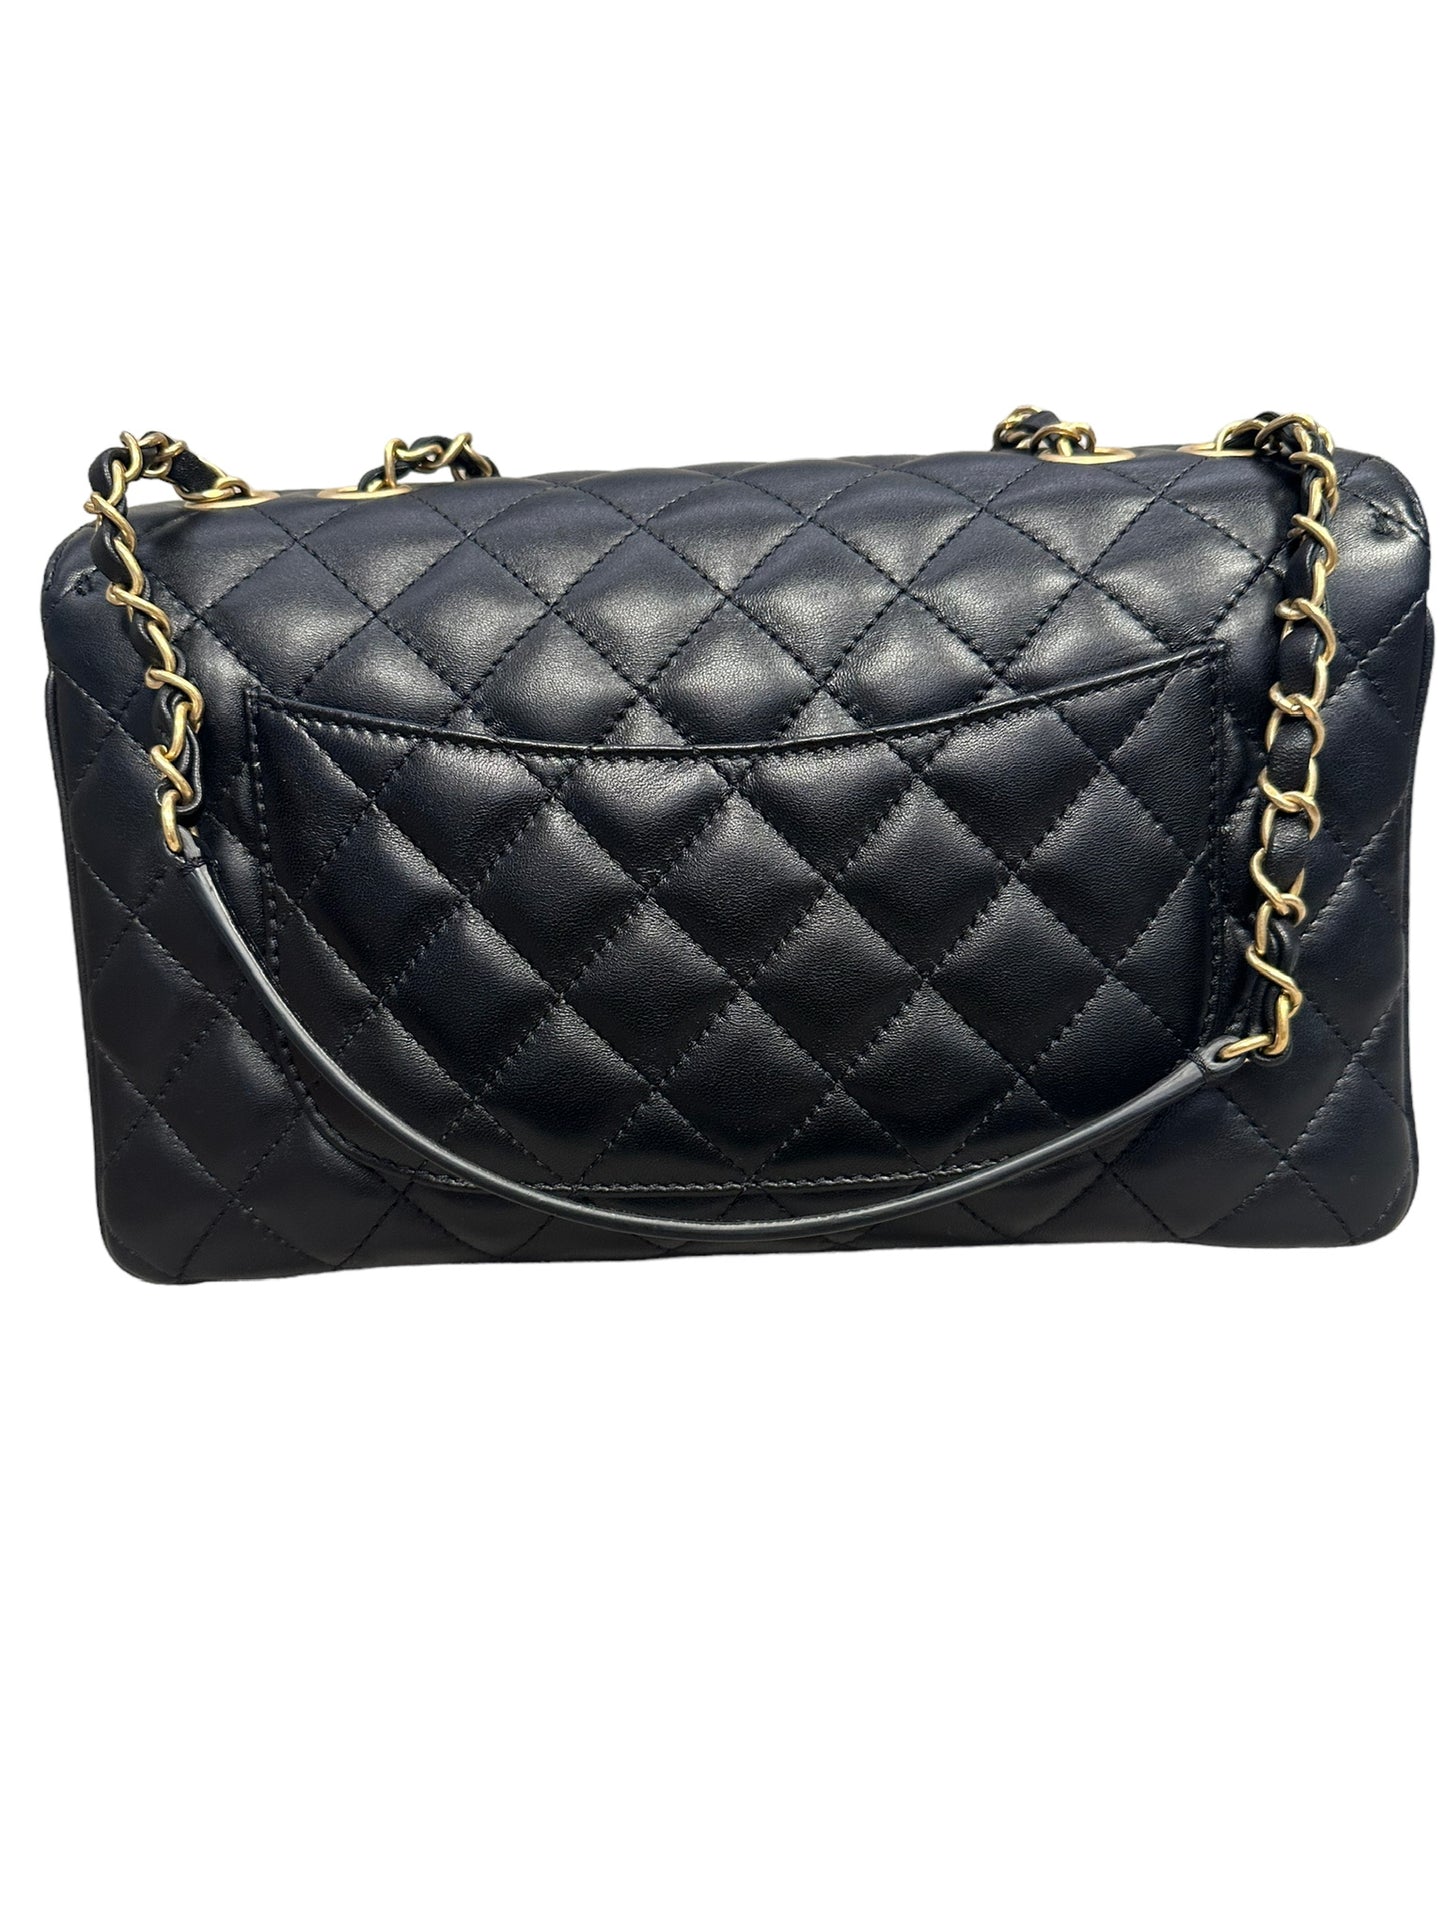 CHANEL - Black Quilted Lambskin Lard Coco Vintage Flap